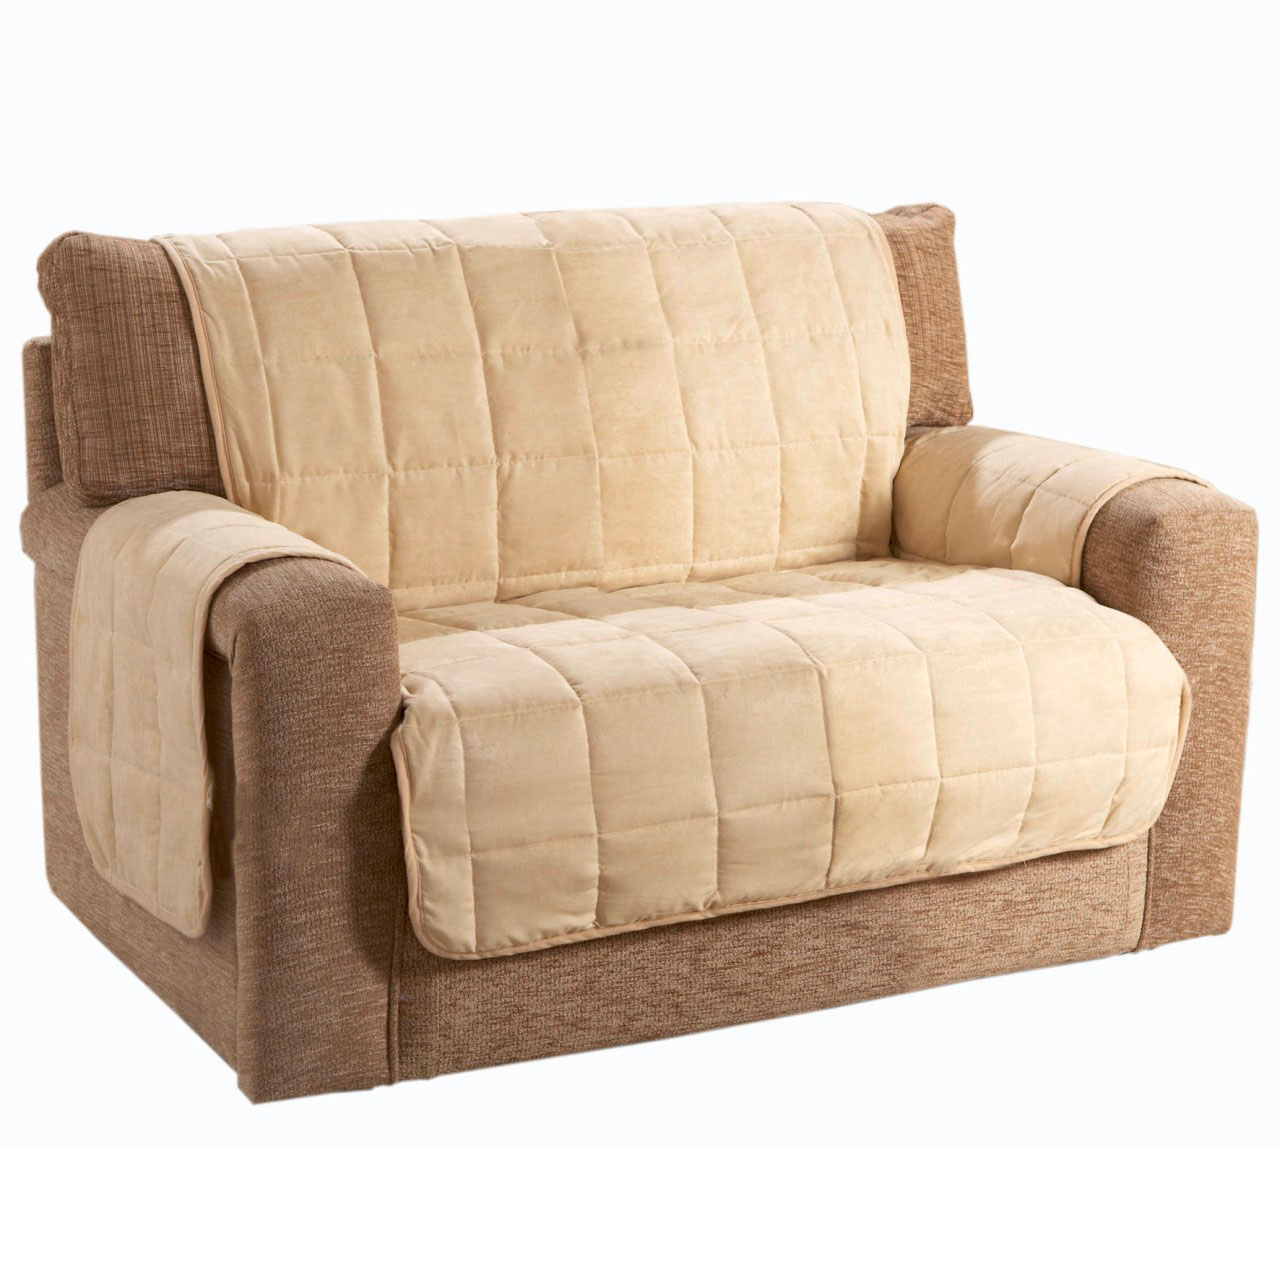 Faux Suede 2-seater Sofa Cover